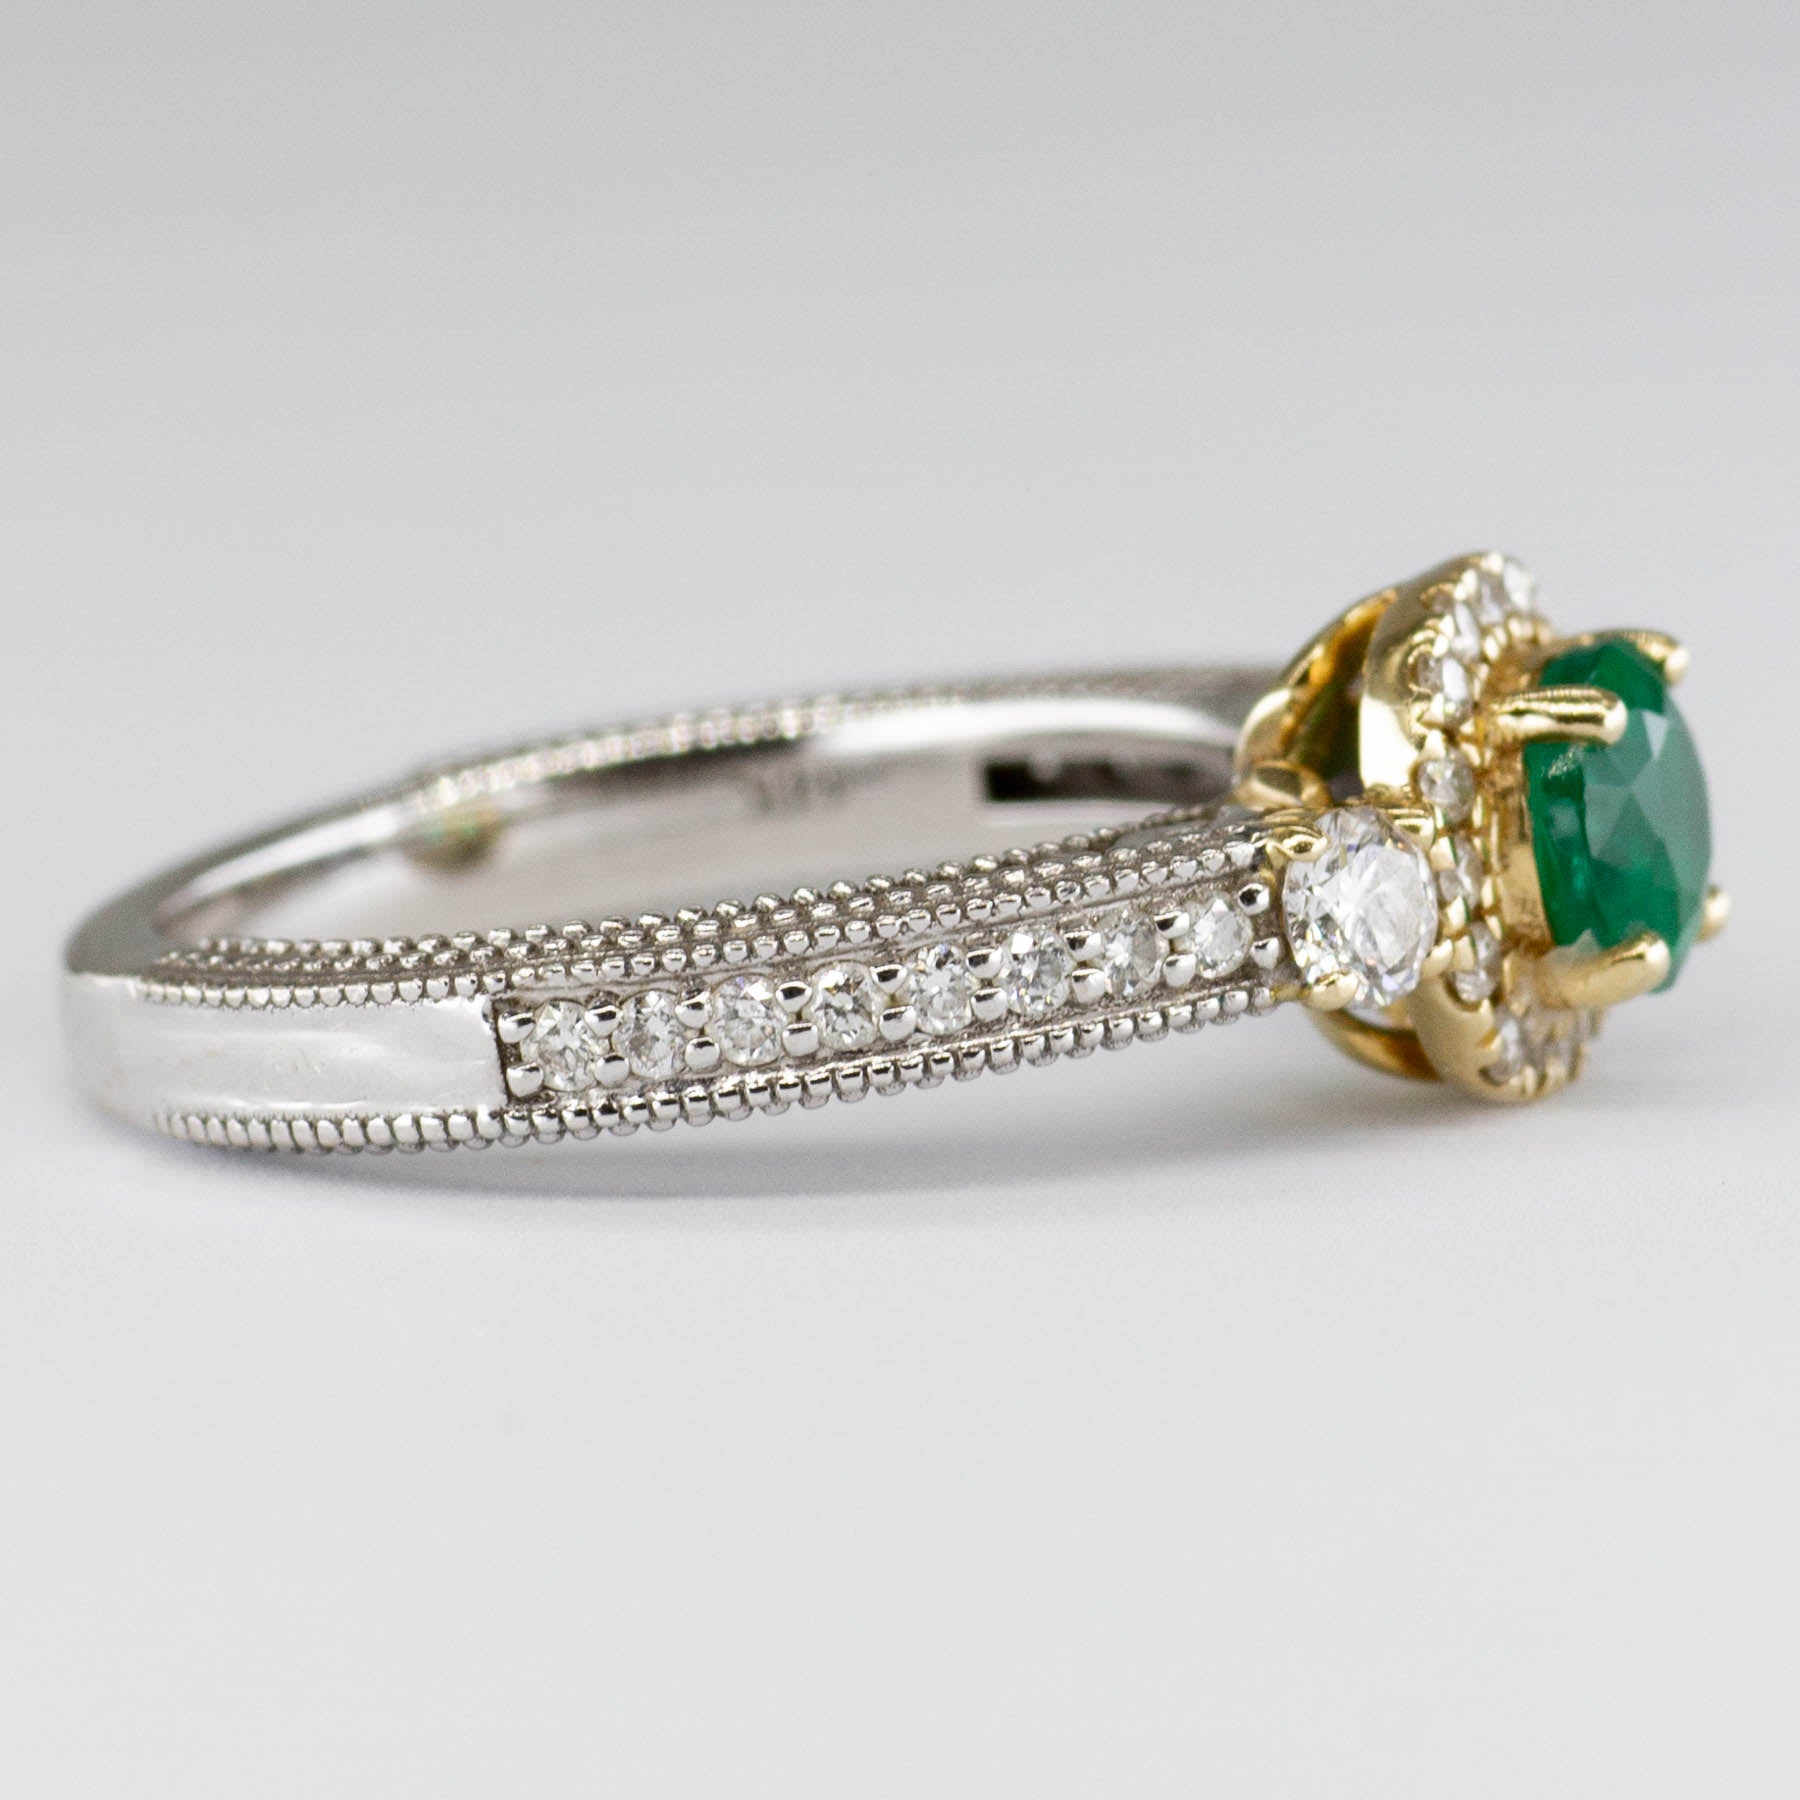 14k Emerald and Diamond Accented Ring | 0.45 ct | SZ 4.75